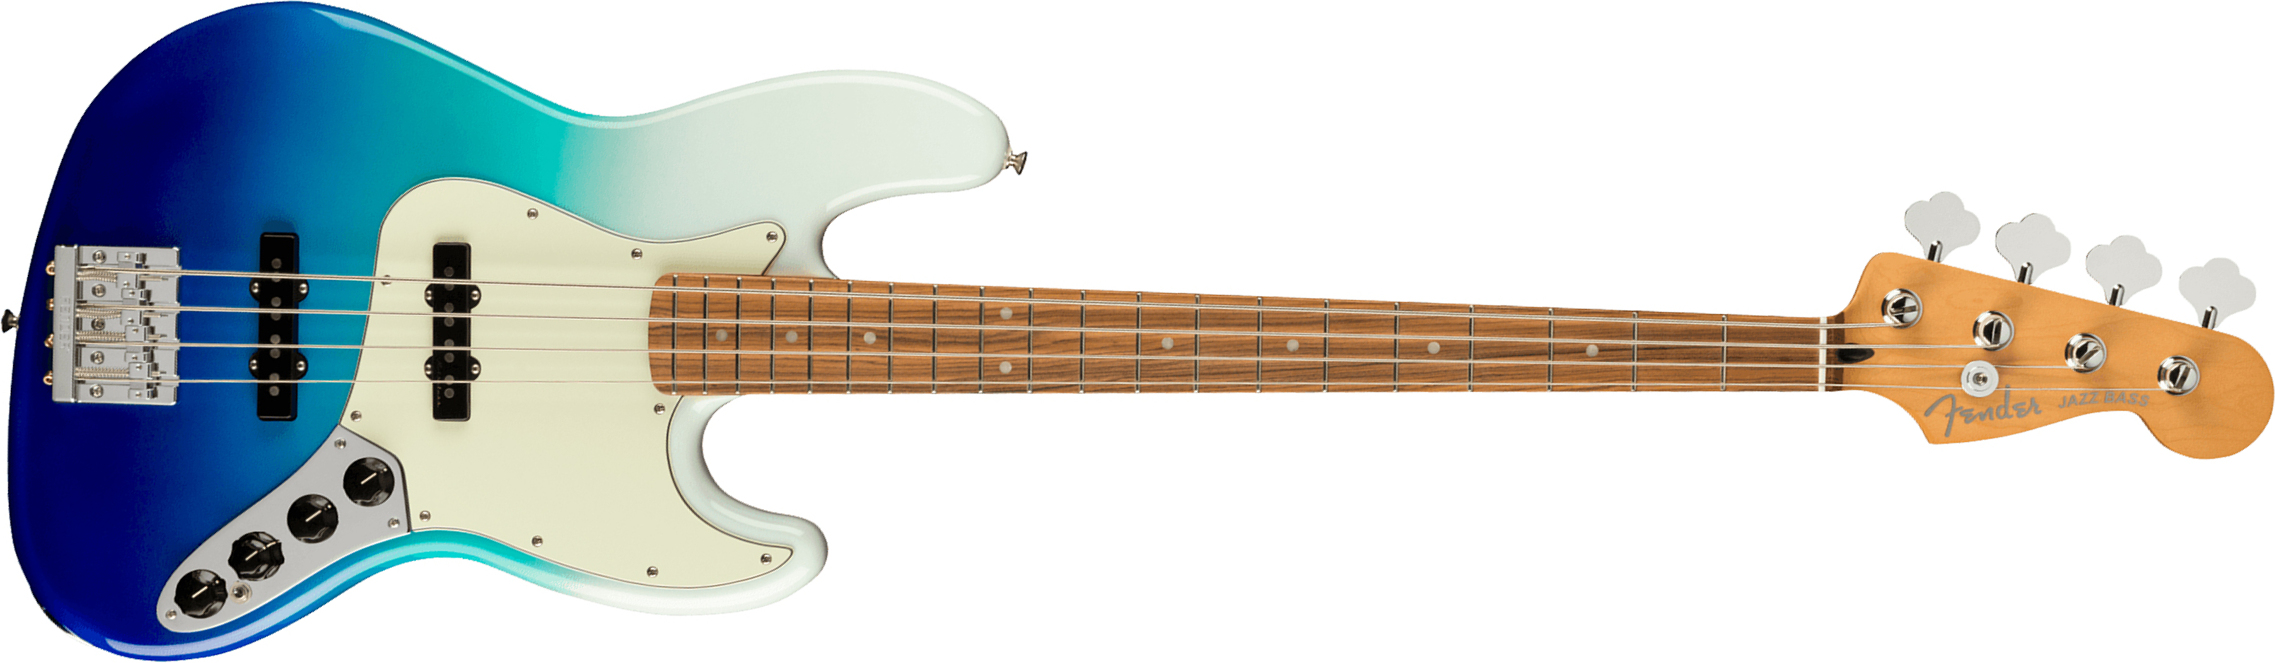 Fender Jazz Bass Player Plus Mex Active Pf - Belair Blue - Solid body electric bass - Main picture